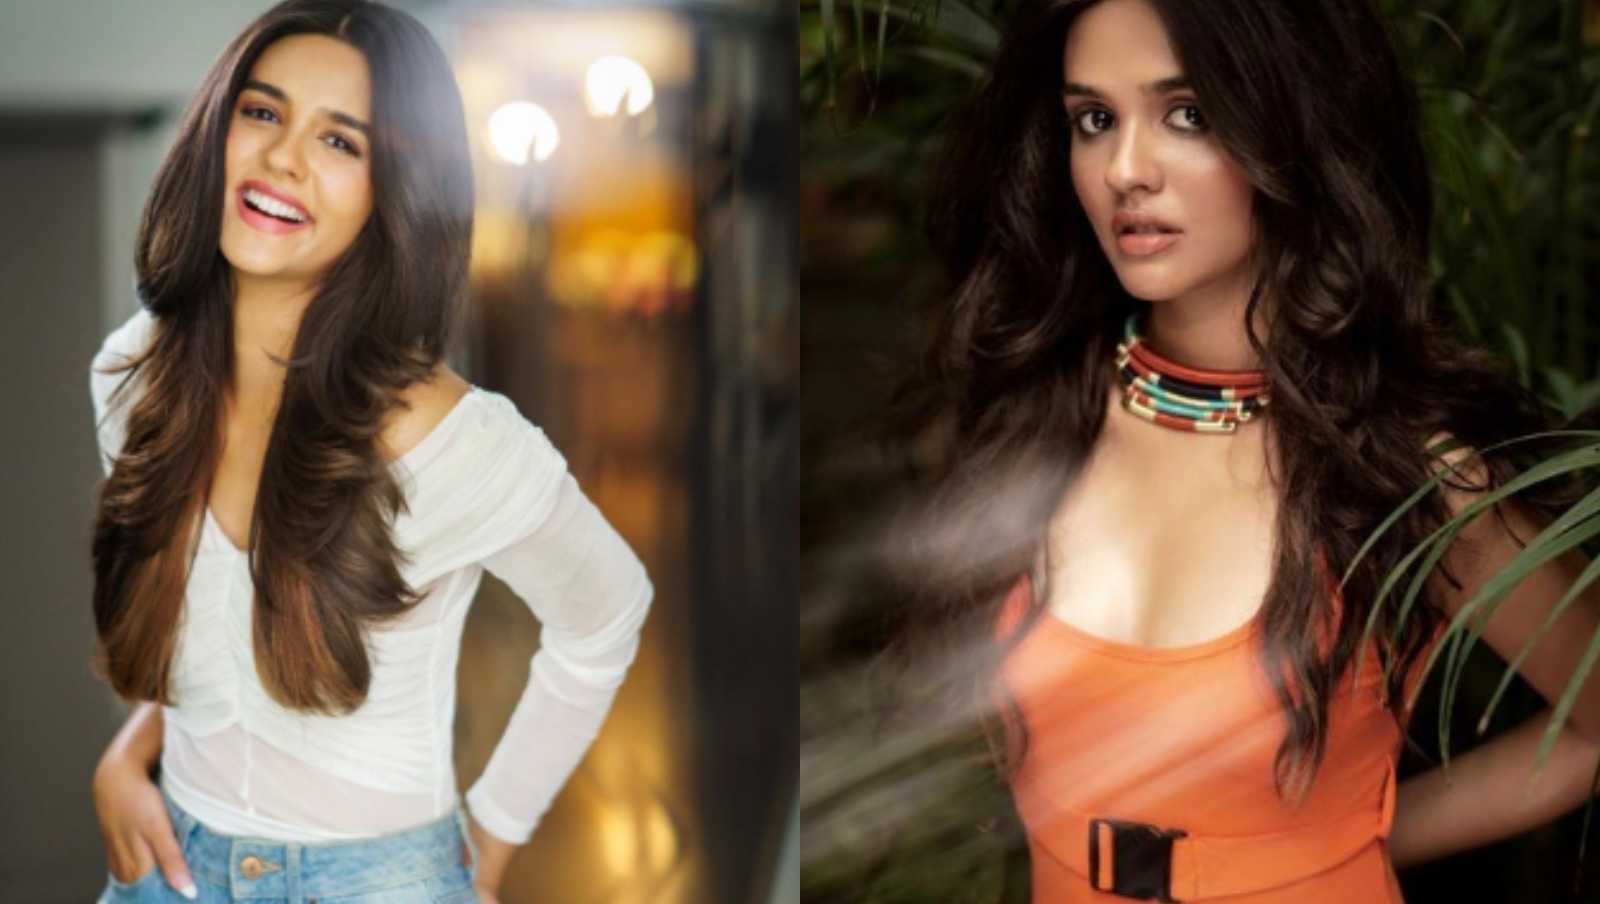 Yeh Rishta Kya Kehlata Hai's Pranali Rathod is a bonafide glam doll, right from serving looks in shorts and swimsuits